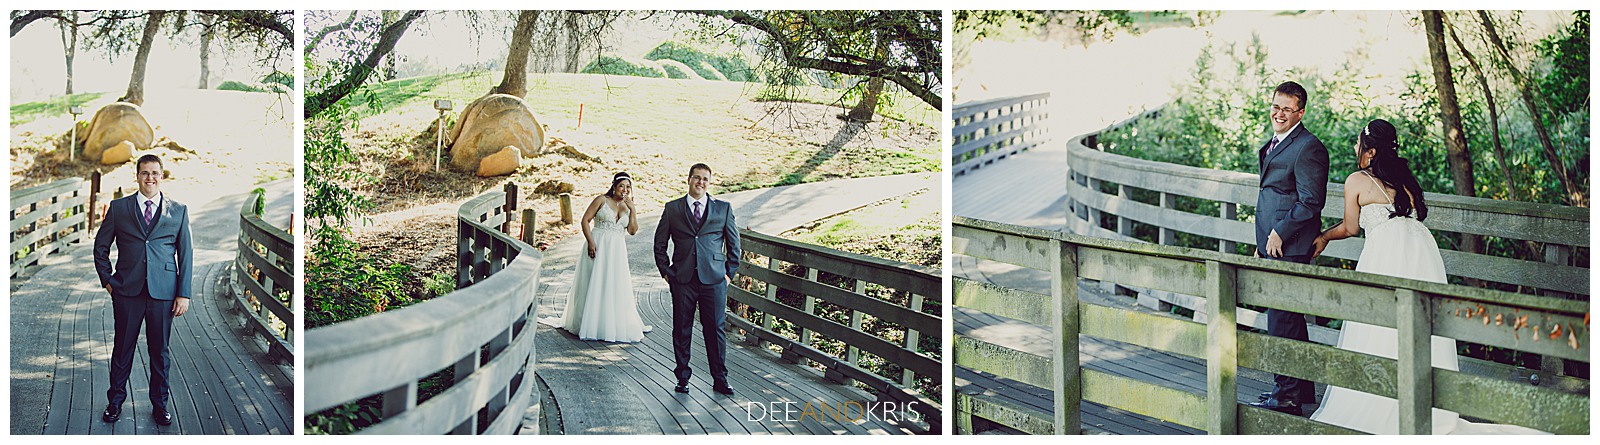 Granite Bay Golf Club Wedding, First Look with Groom, Granite Bay Gold Course pictures